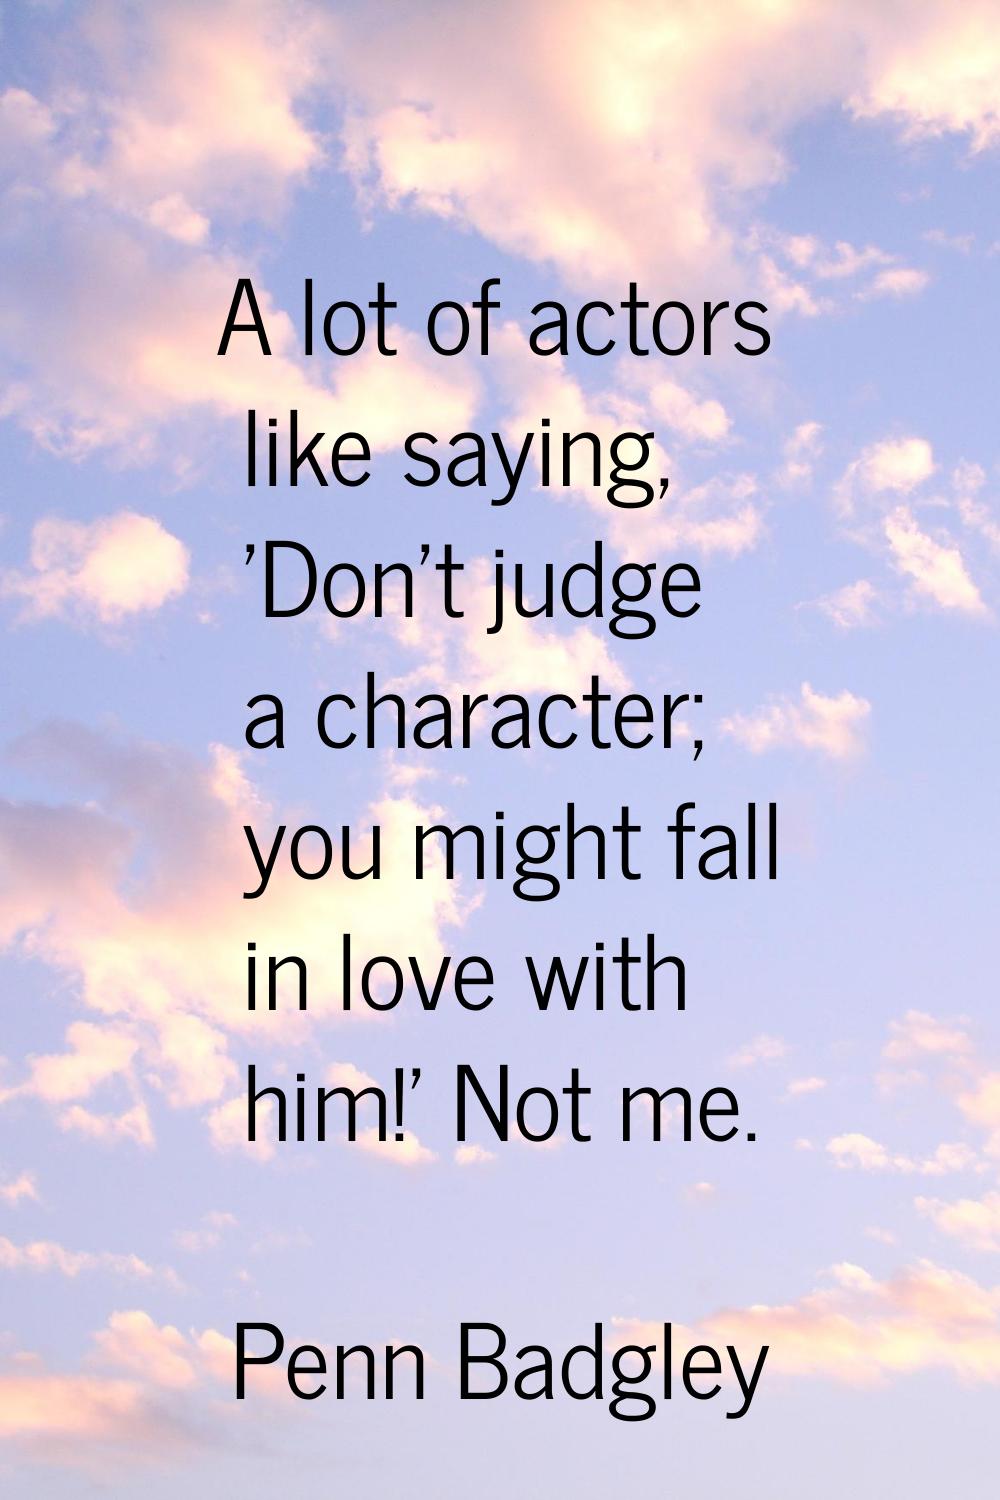 A lot of actors like saying, 'Don't judge a character; you might fall in love with him!' Not me.